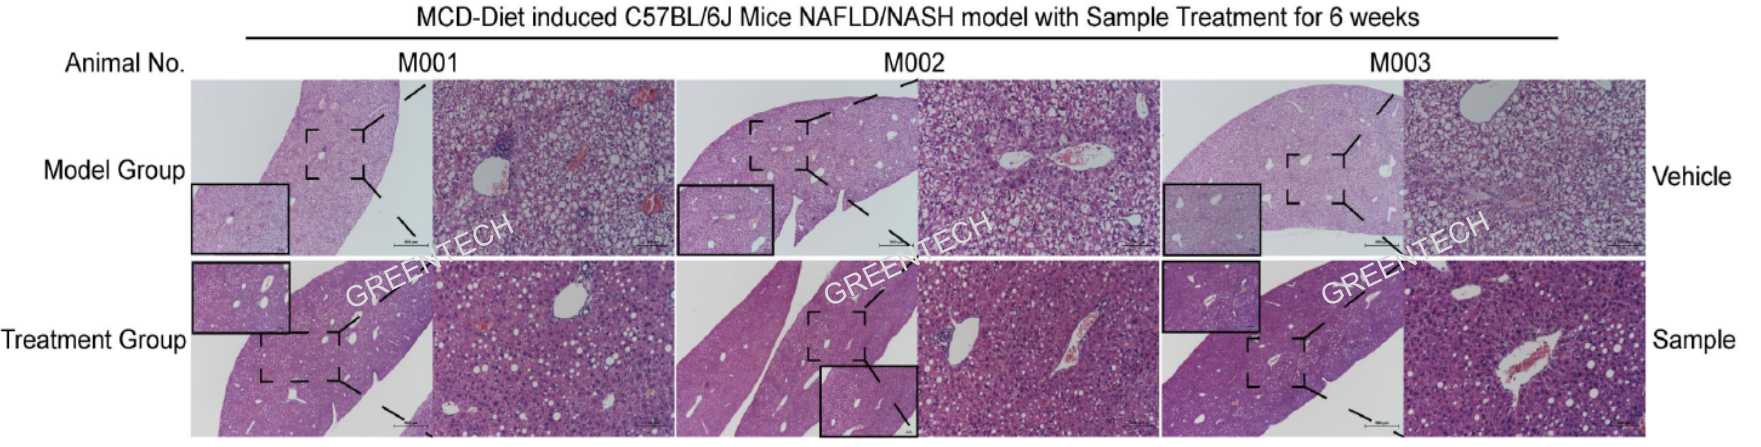 Liver histopathology of rodent NASH models induced by MCD diet feeding for 6 weeks.png